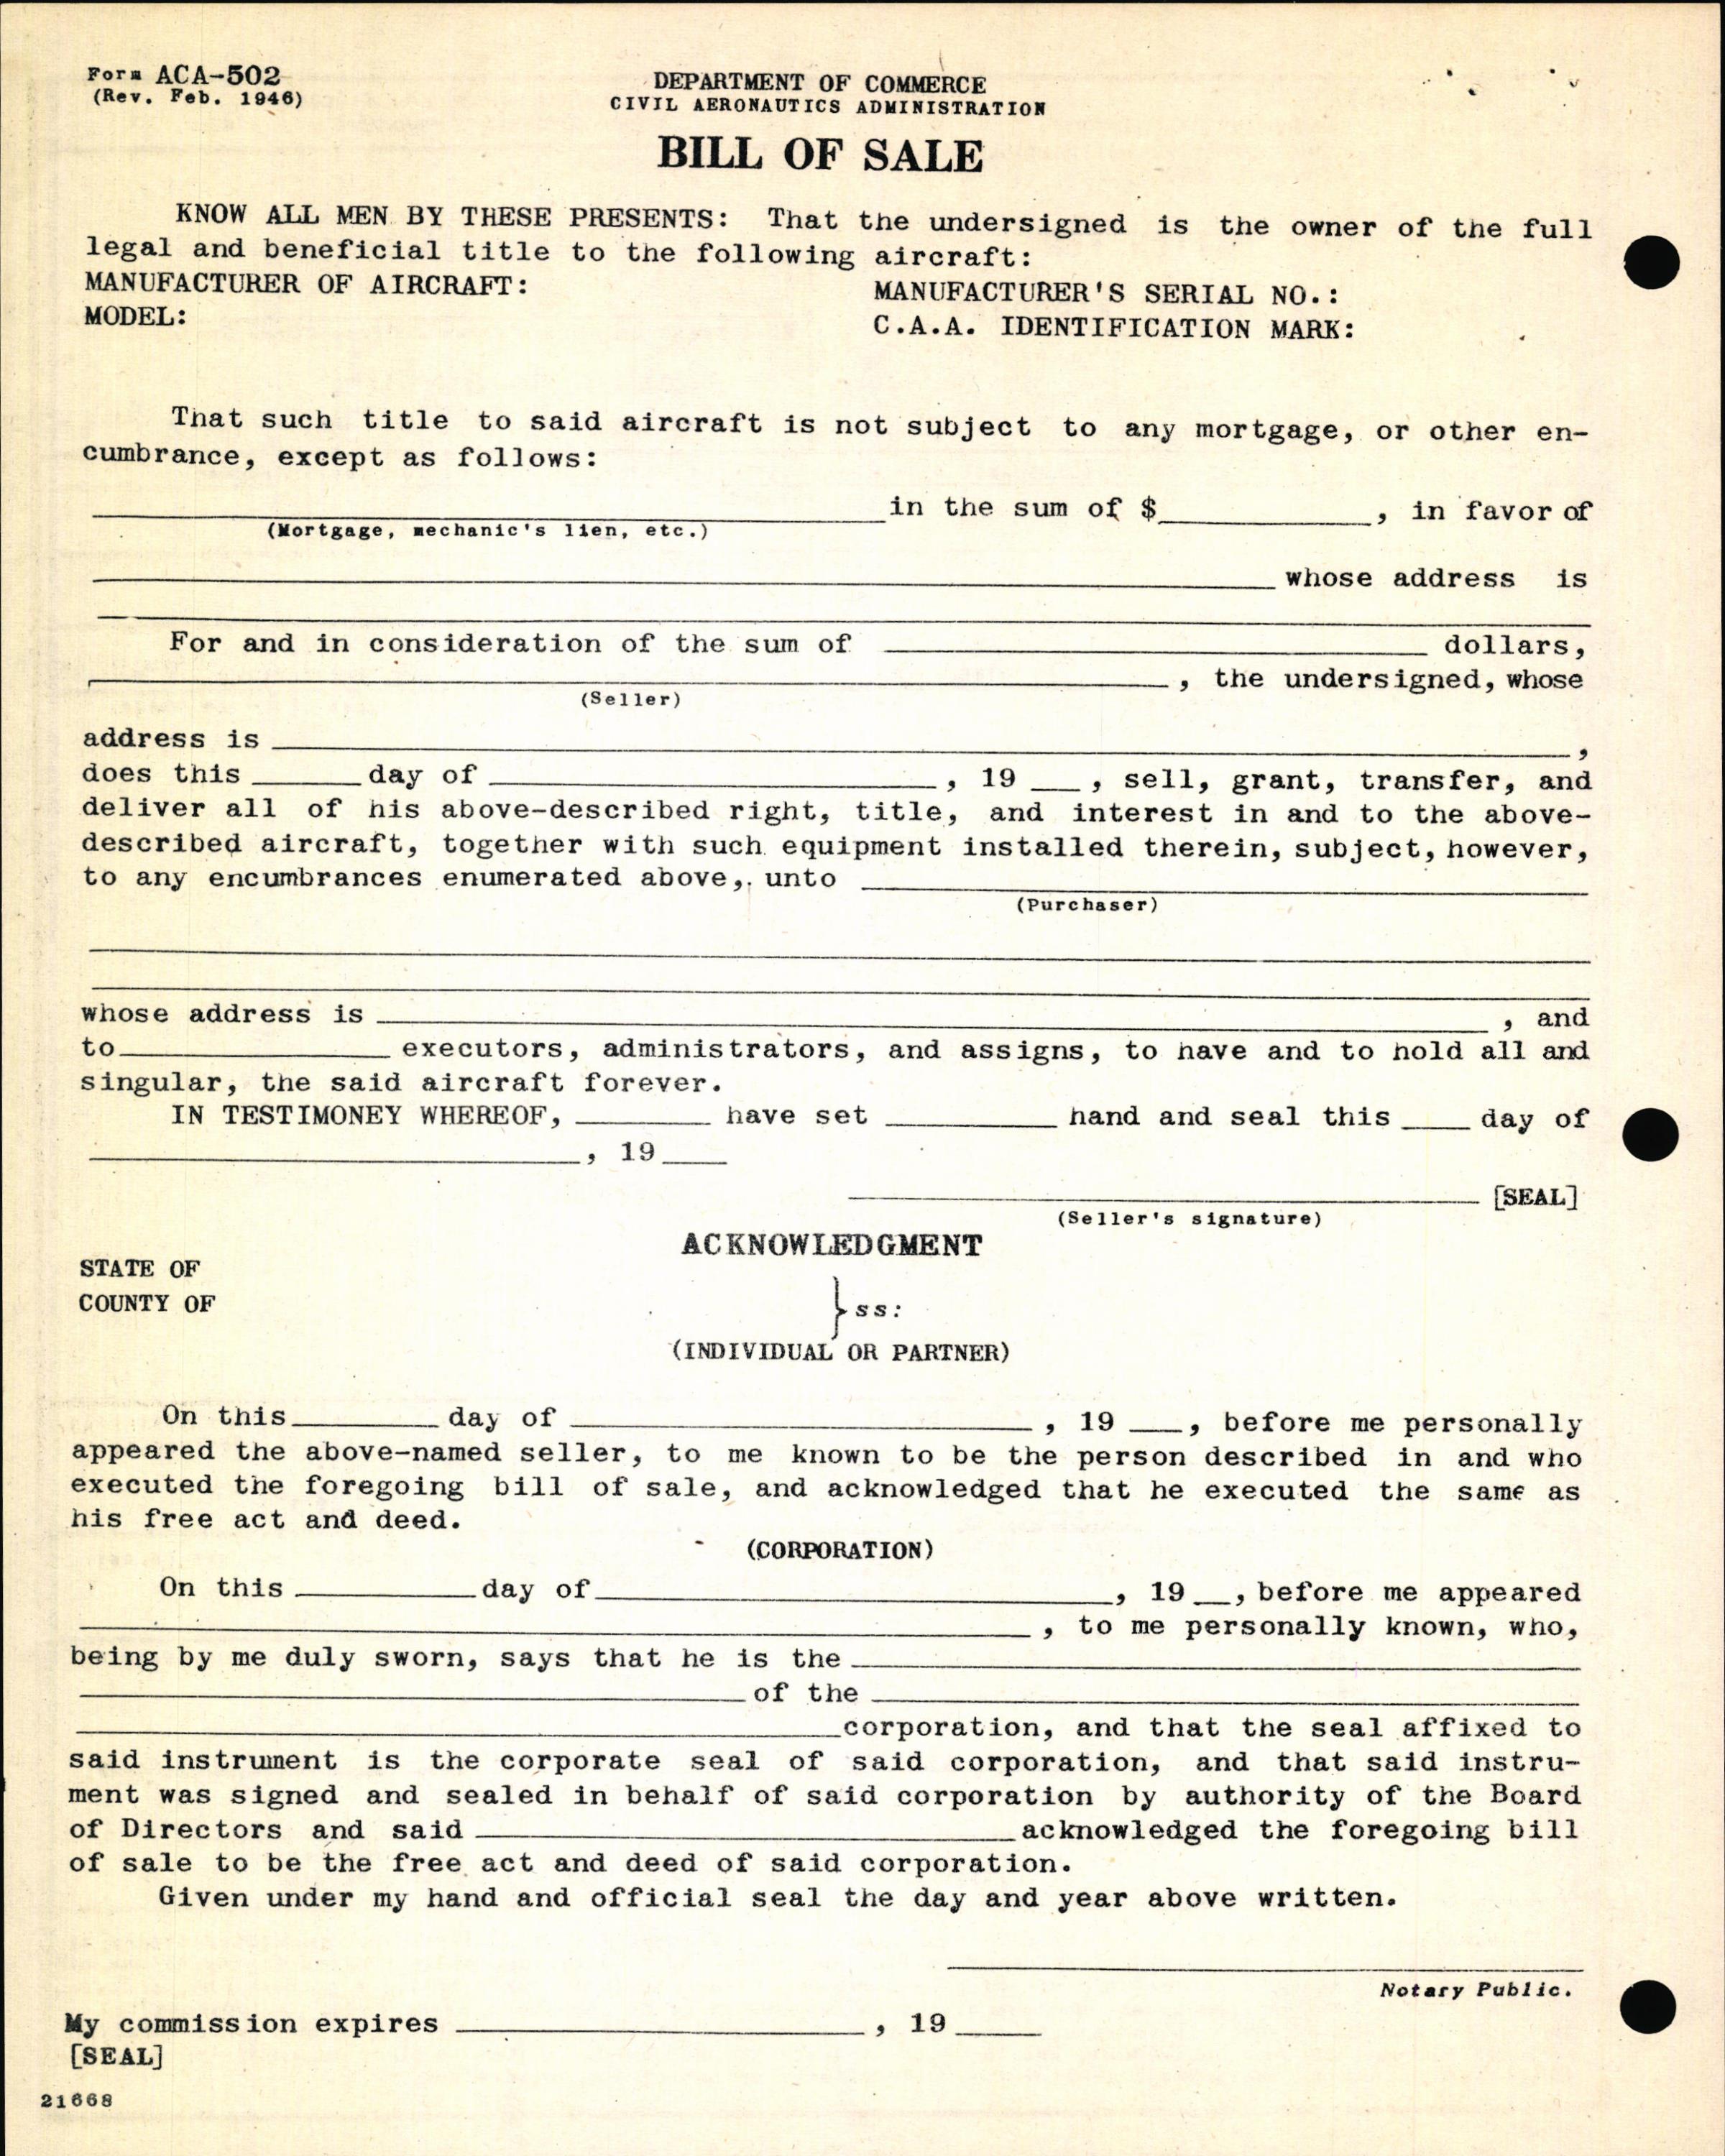 Sample page 6 from AirCorps Library document: Technical Information for Serial Number 1252